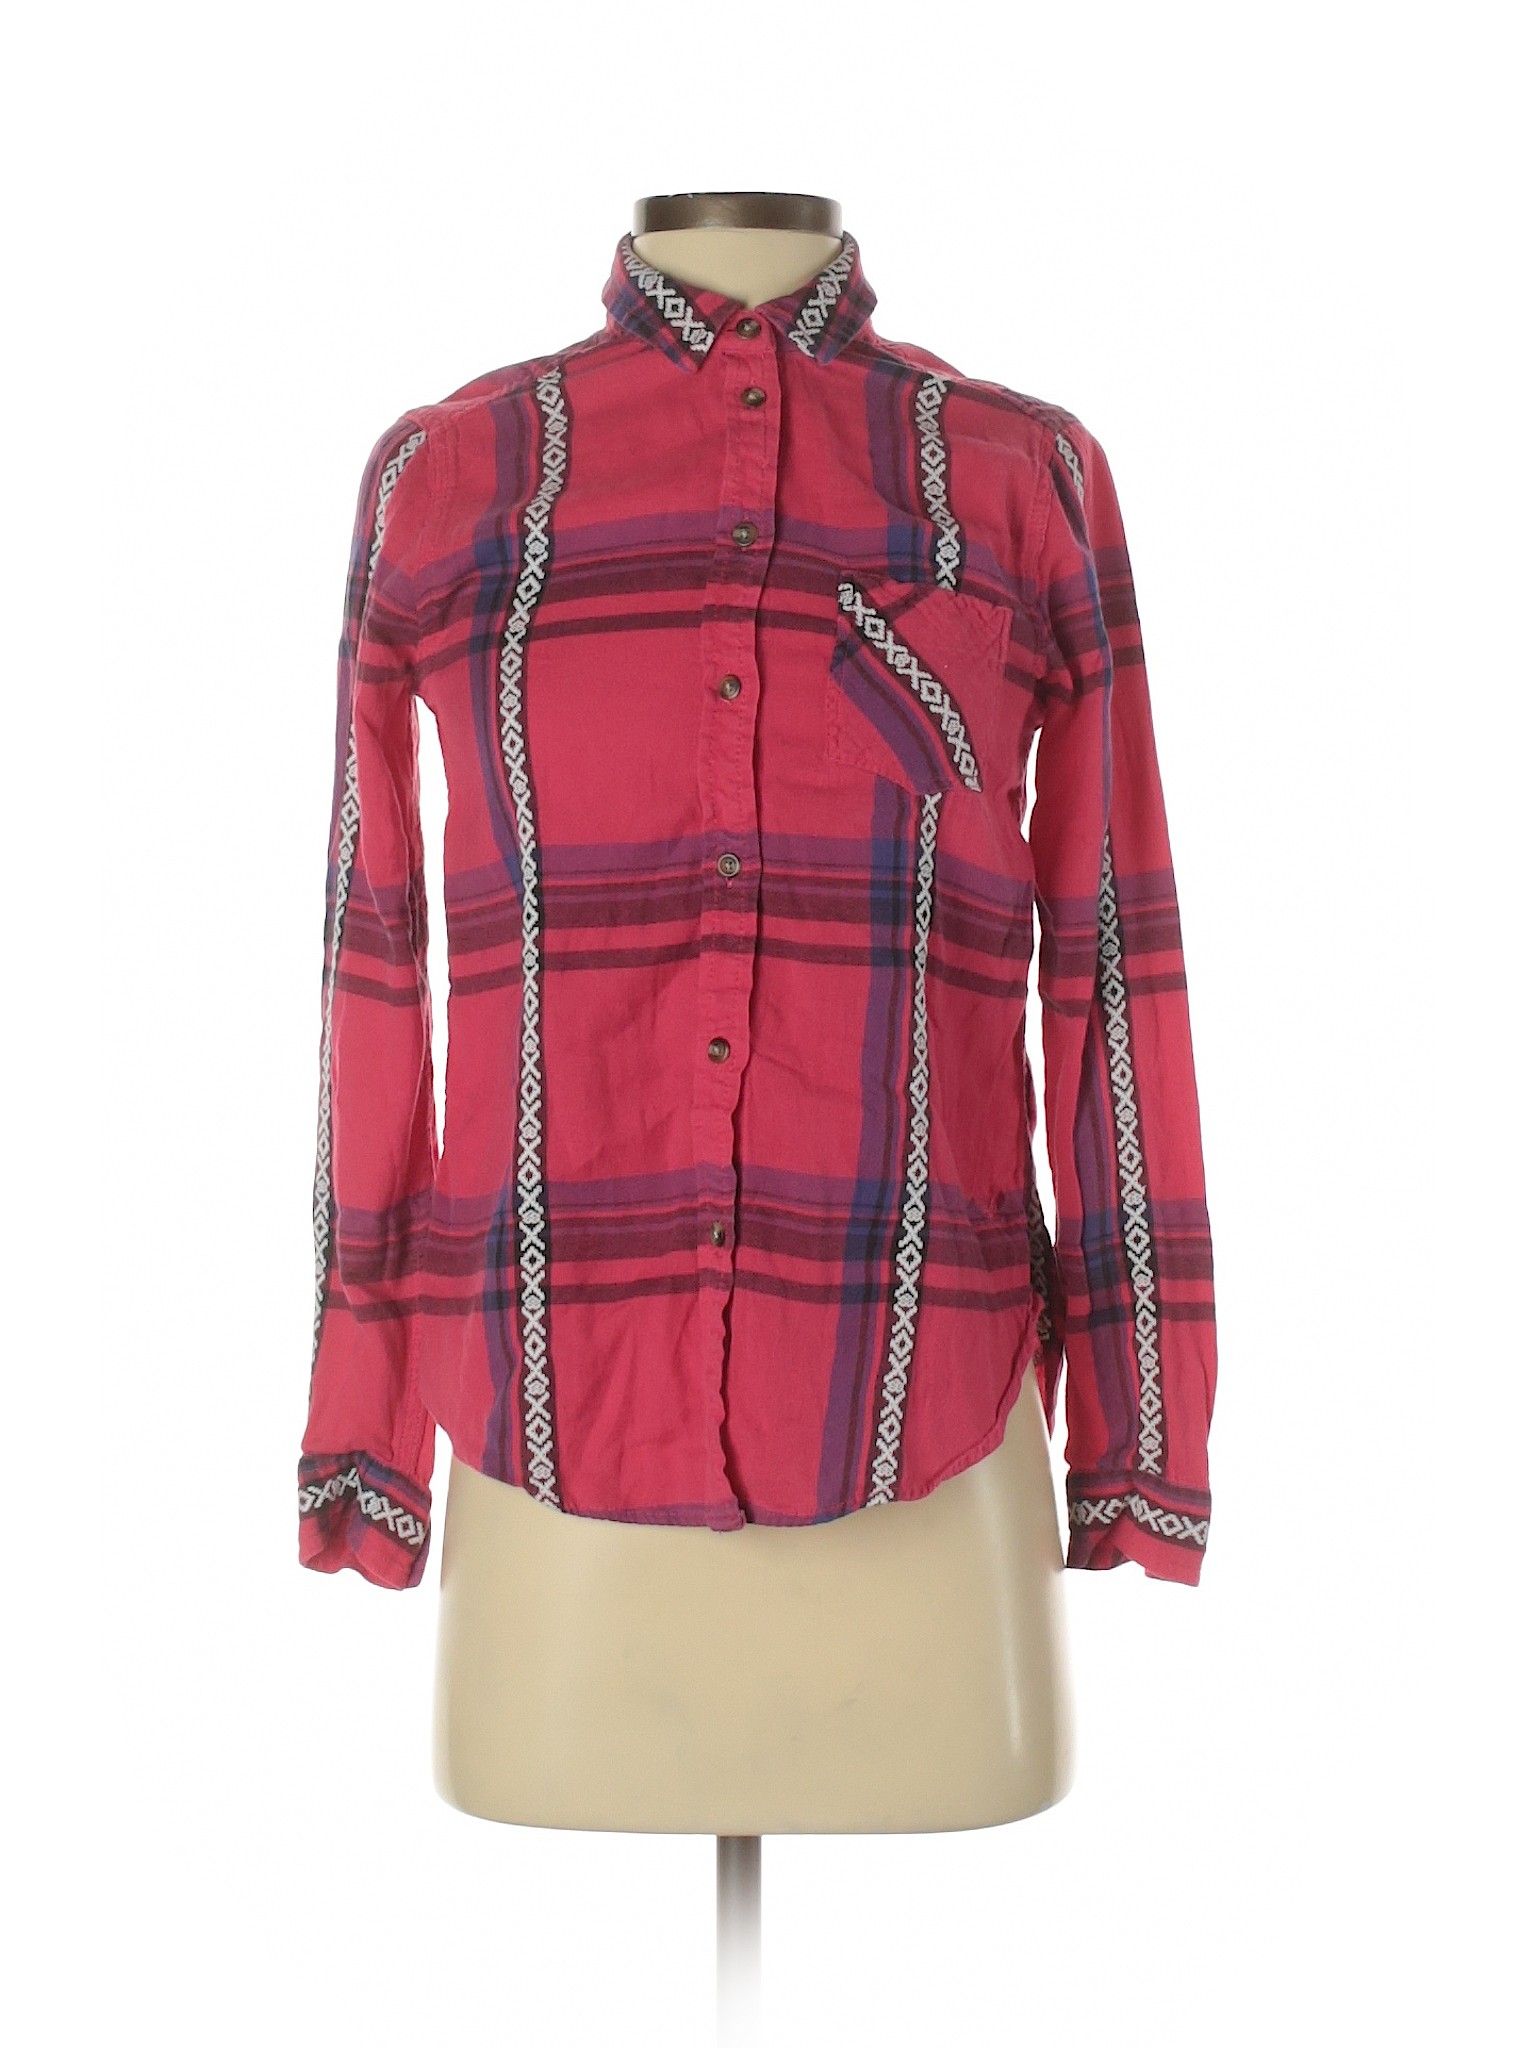 American Eagle Outfitters Women Red Long Sleeve Button-Down Shirt XS | eBay